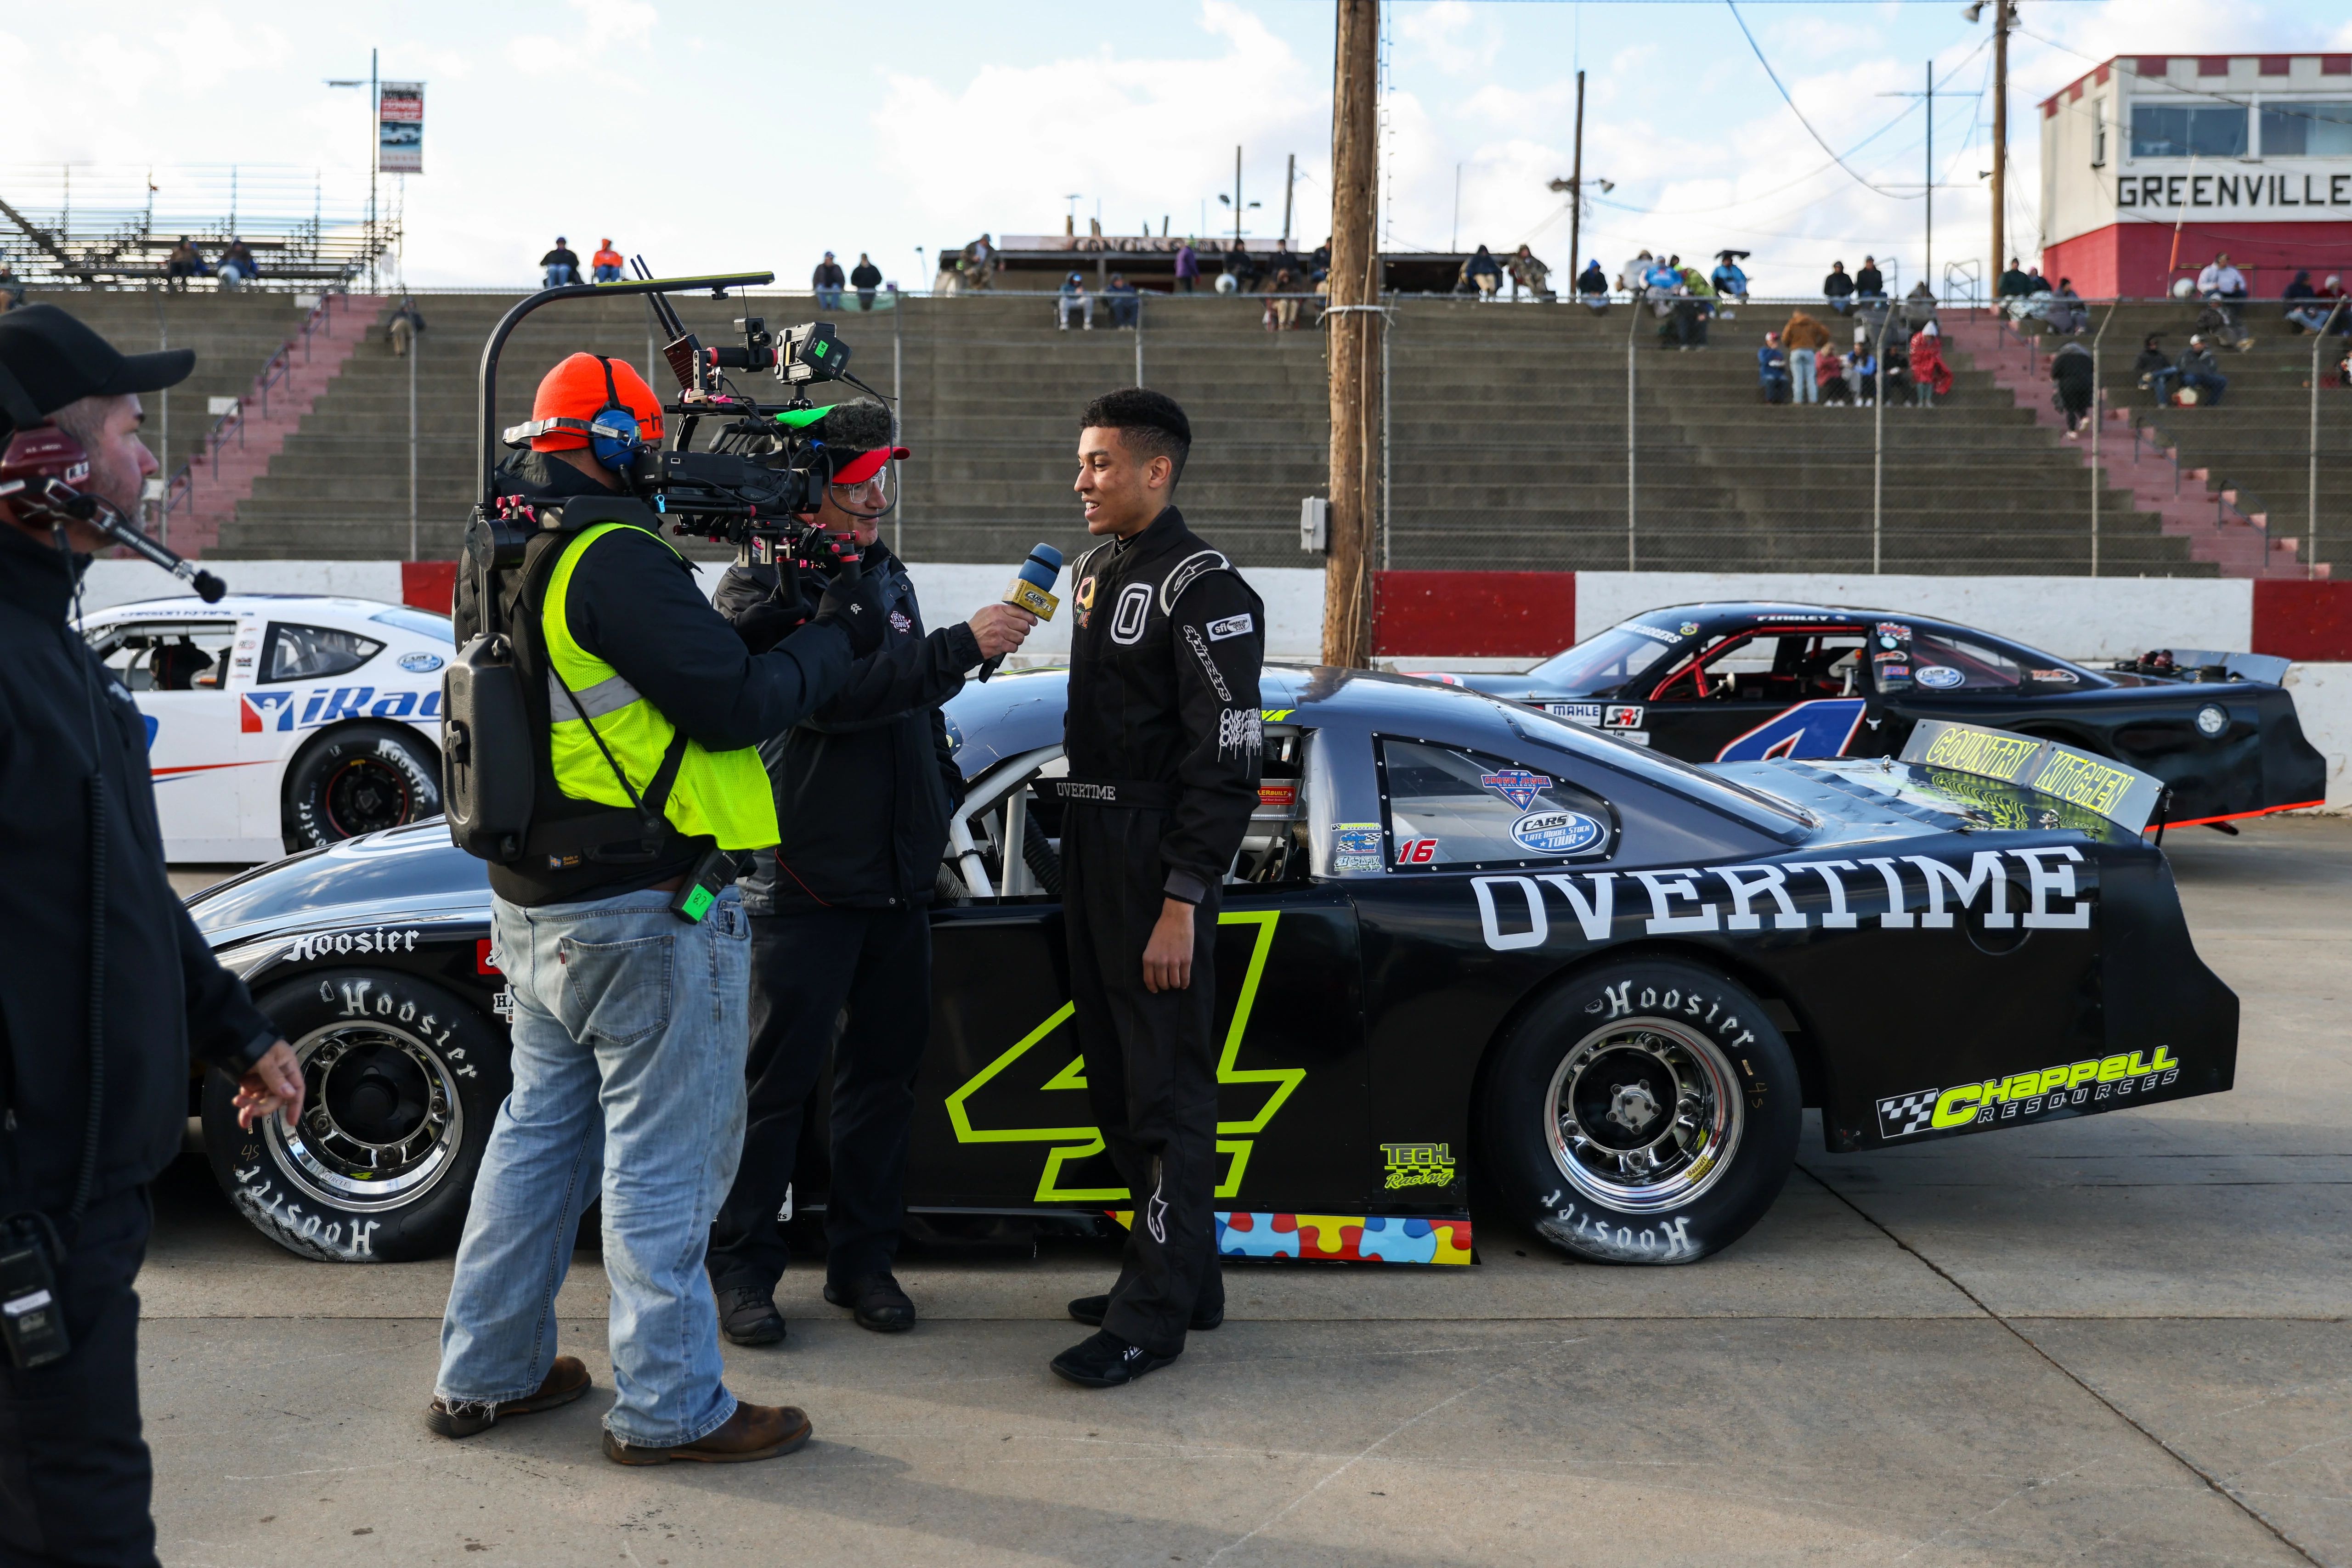 Hayden Swank gives an interview prior to the race at Greenville-Pickens Speedway in Easley, South Carolina. 